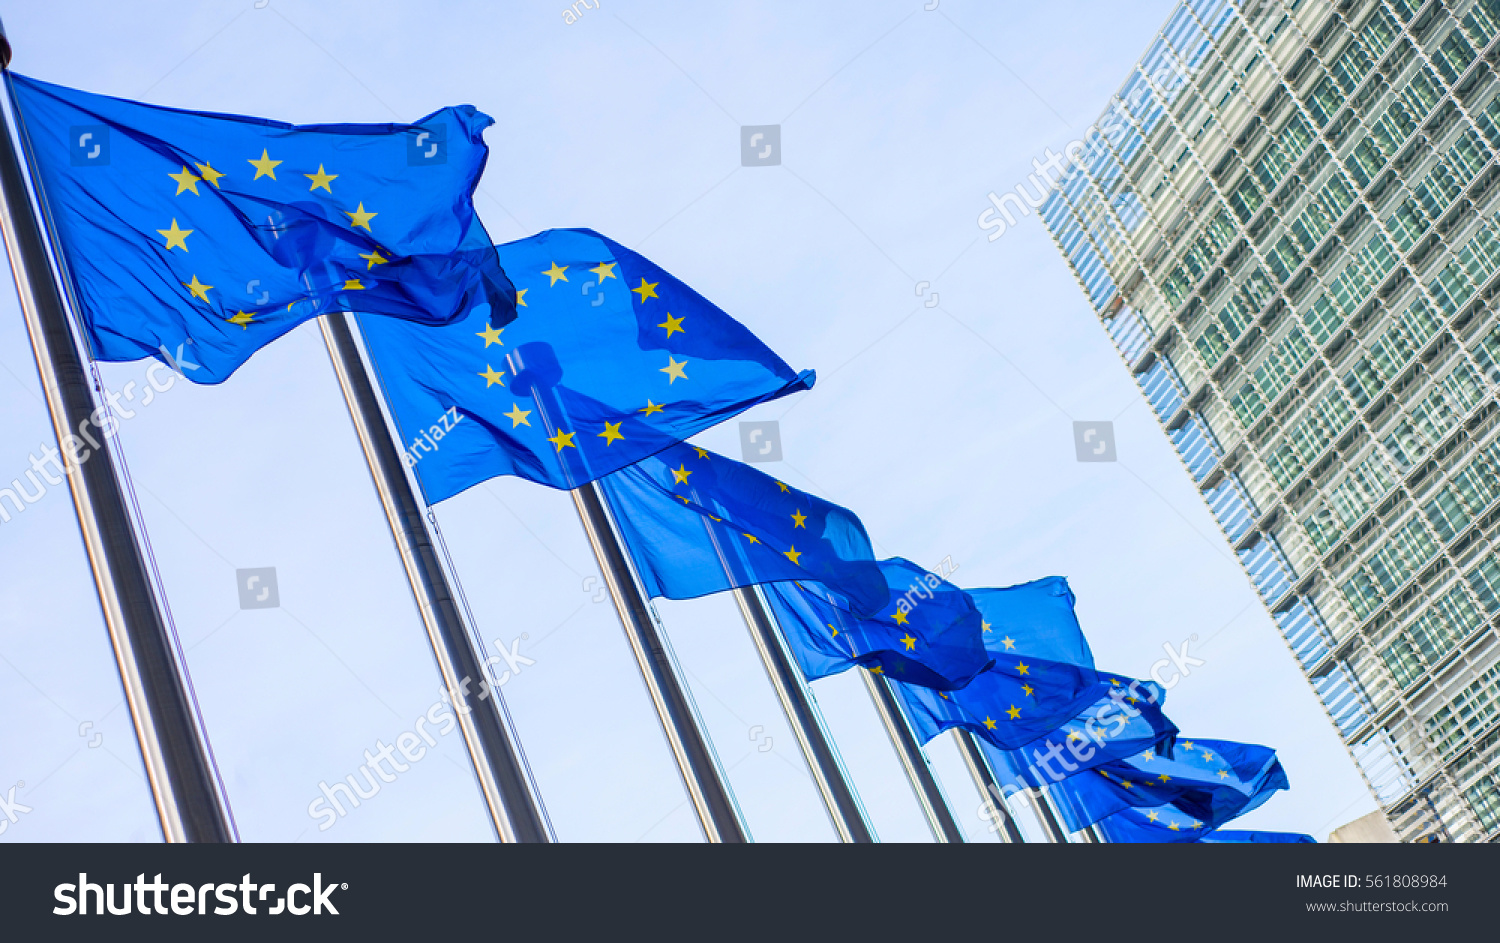 European Union flags in front of the Berlaymont building #561808984